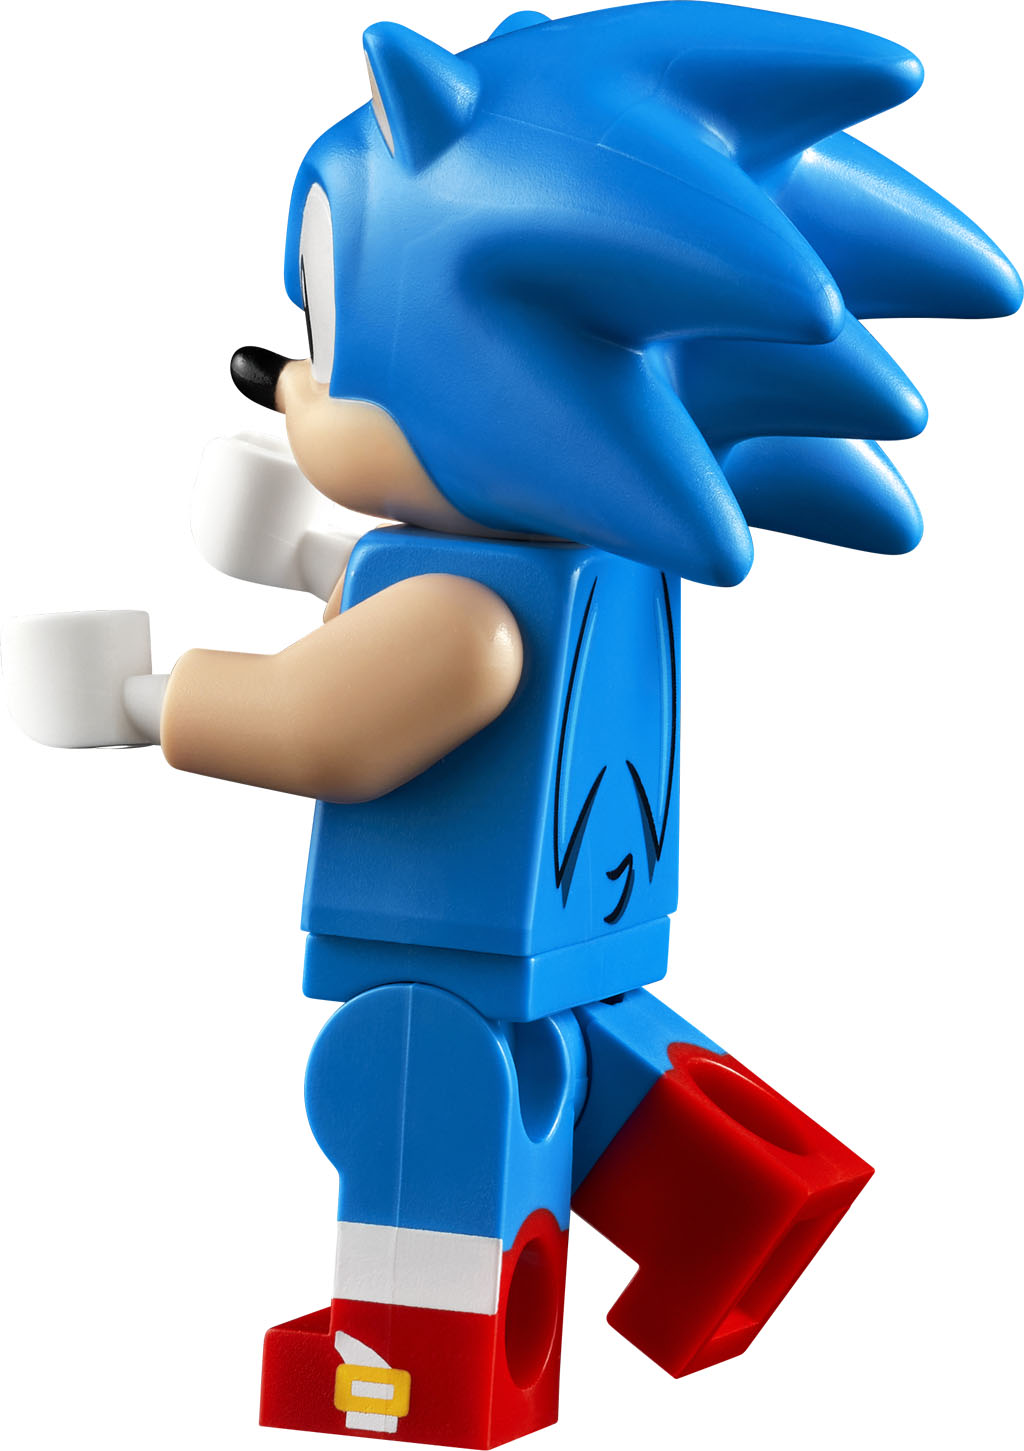 Launch details and photos of the LEGO Ideas 21331 Sonic the